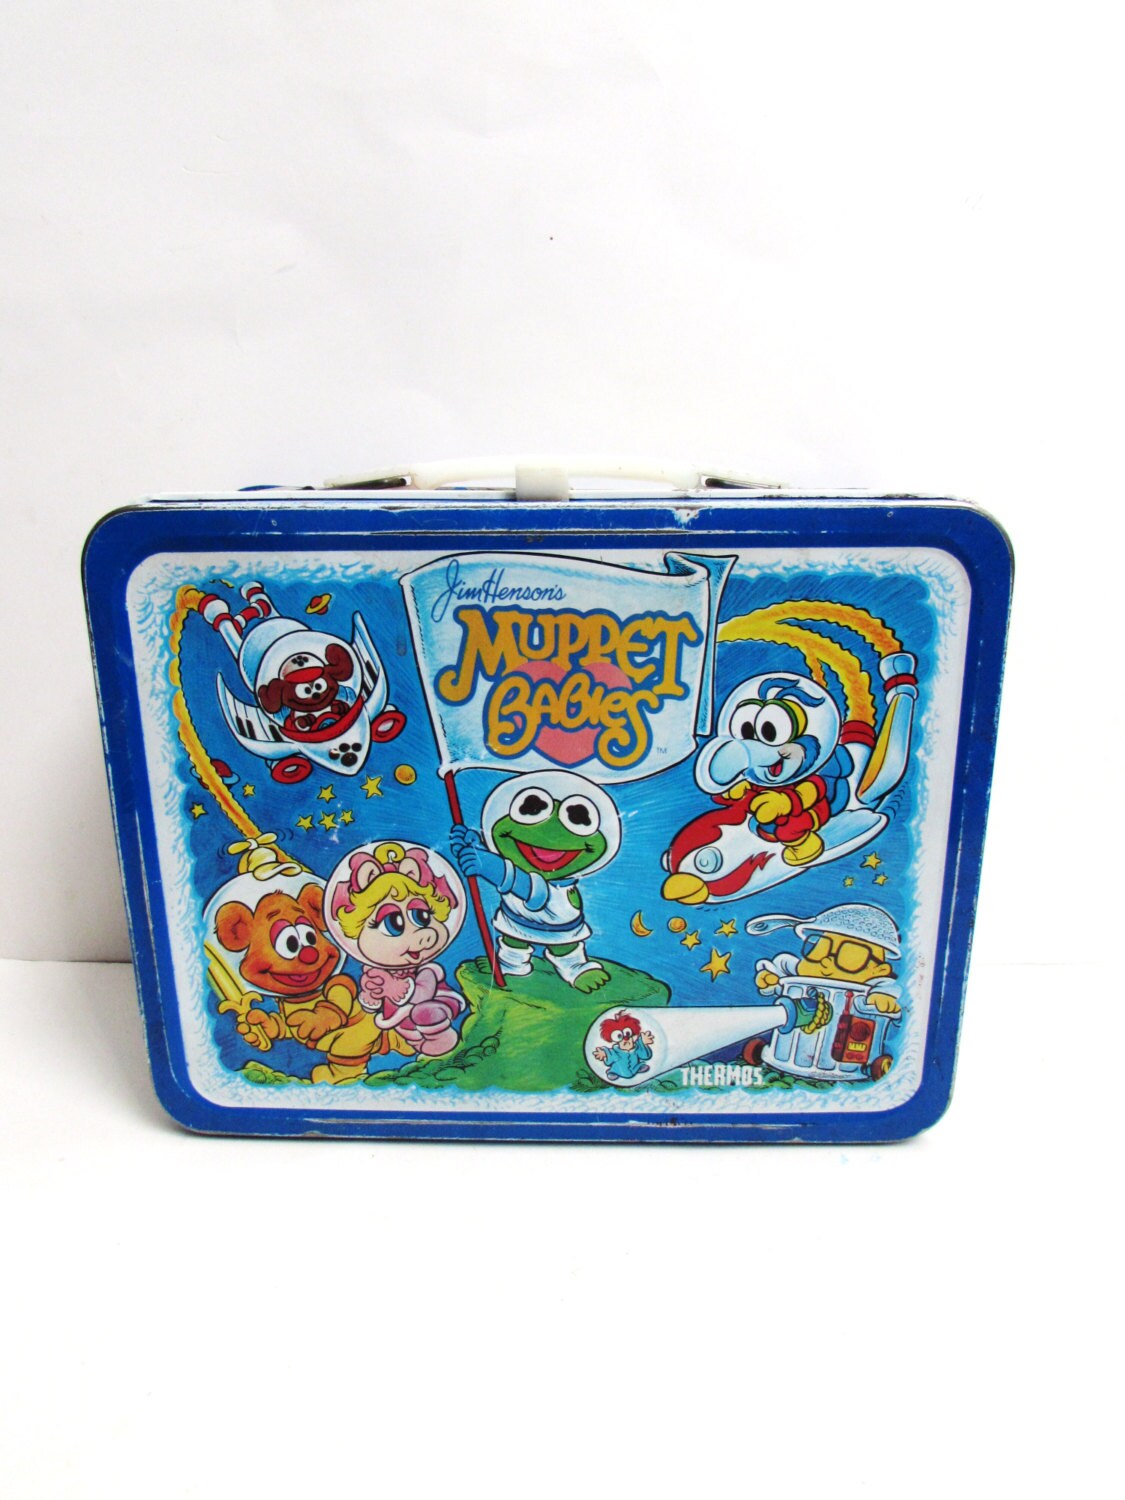 Muppet Babies Metal Lunch Box by Thermos 1980's Vintage